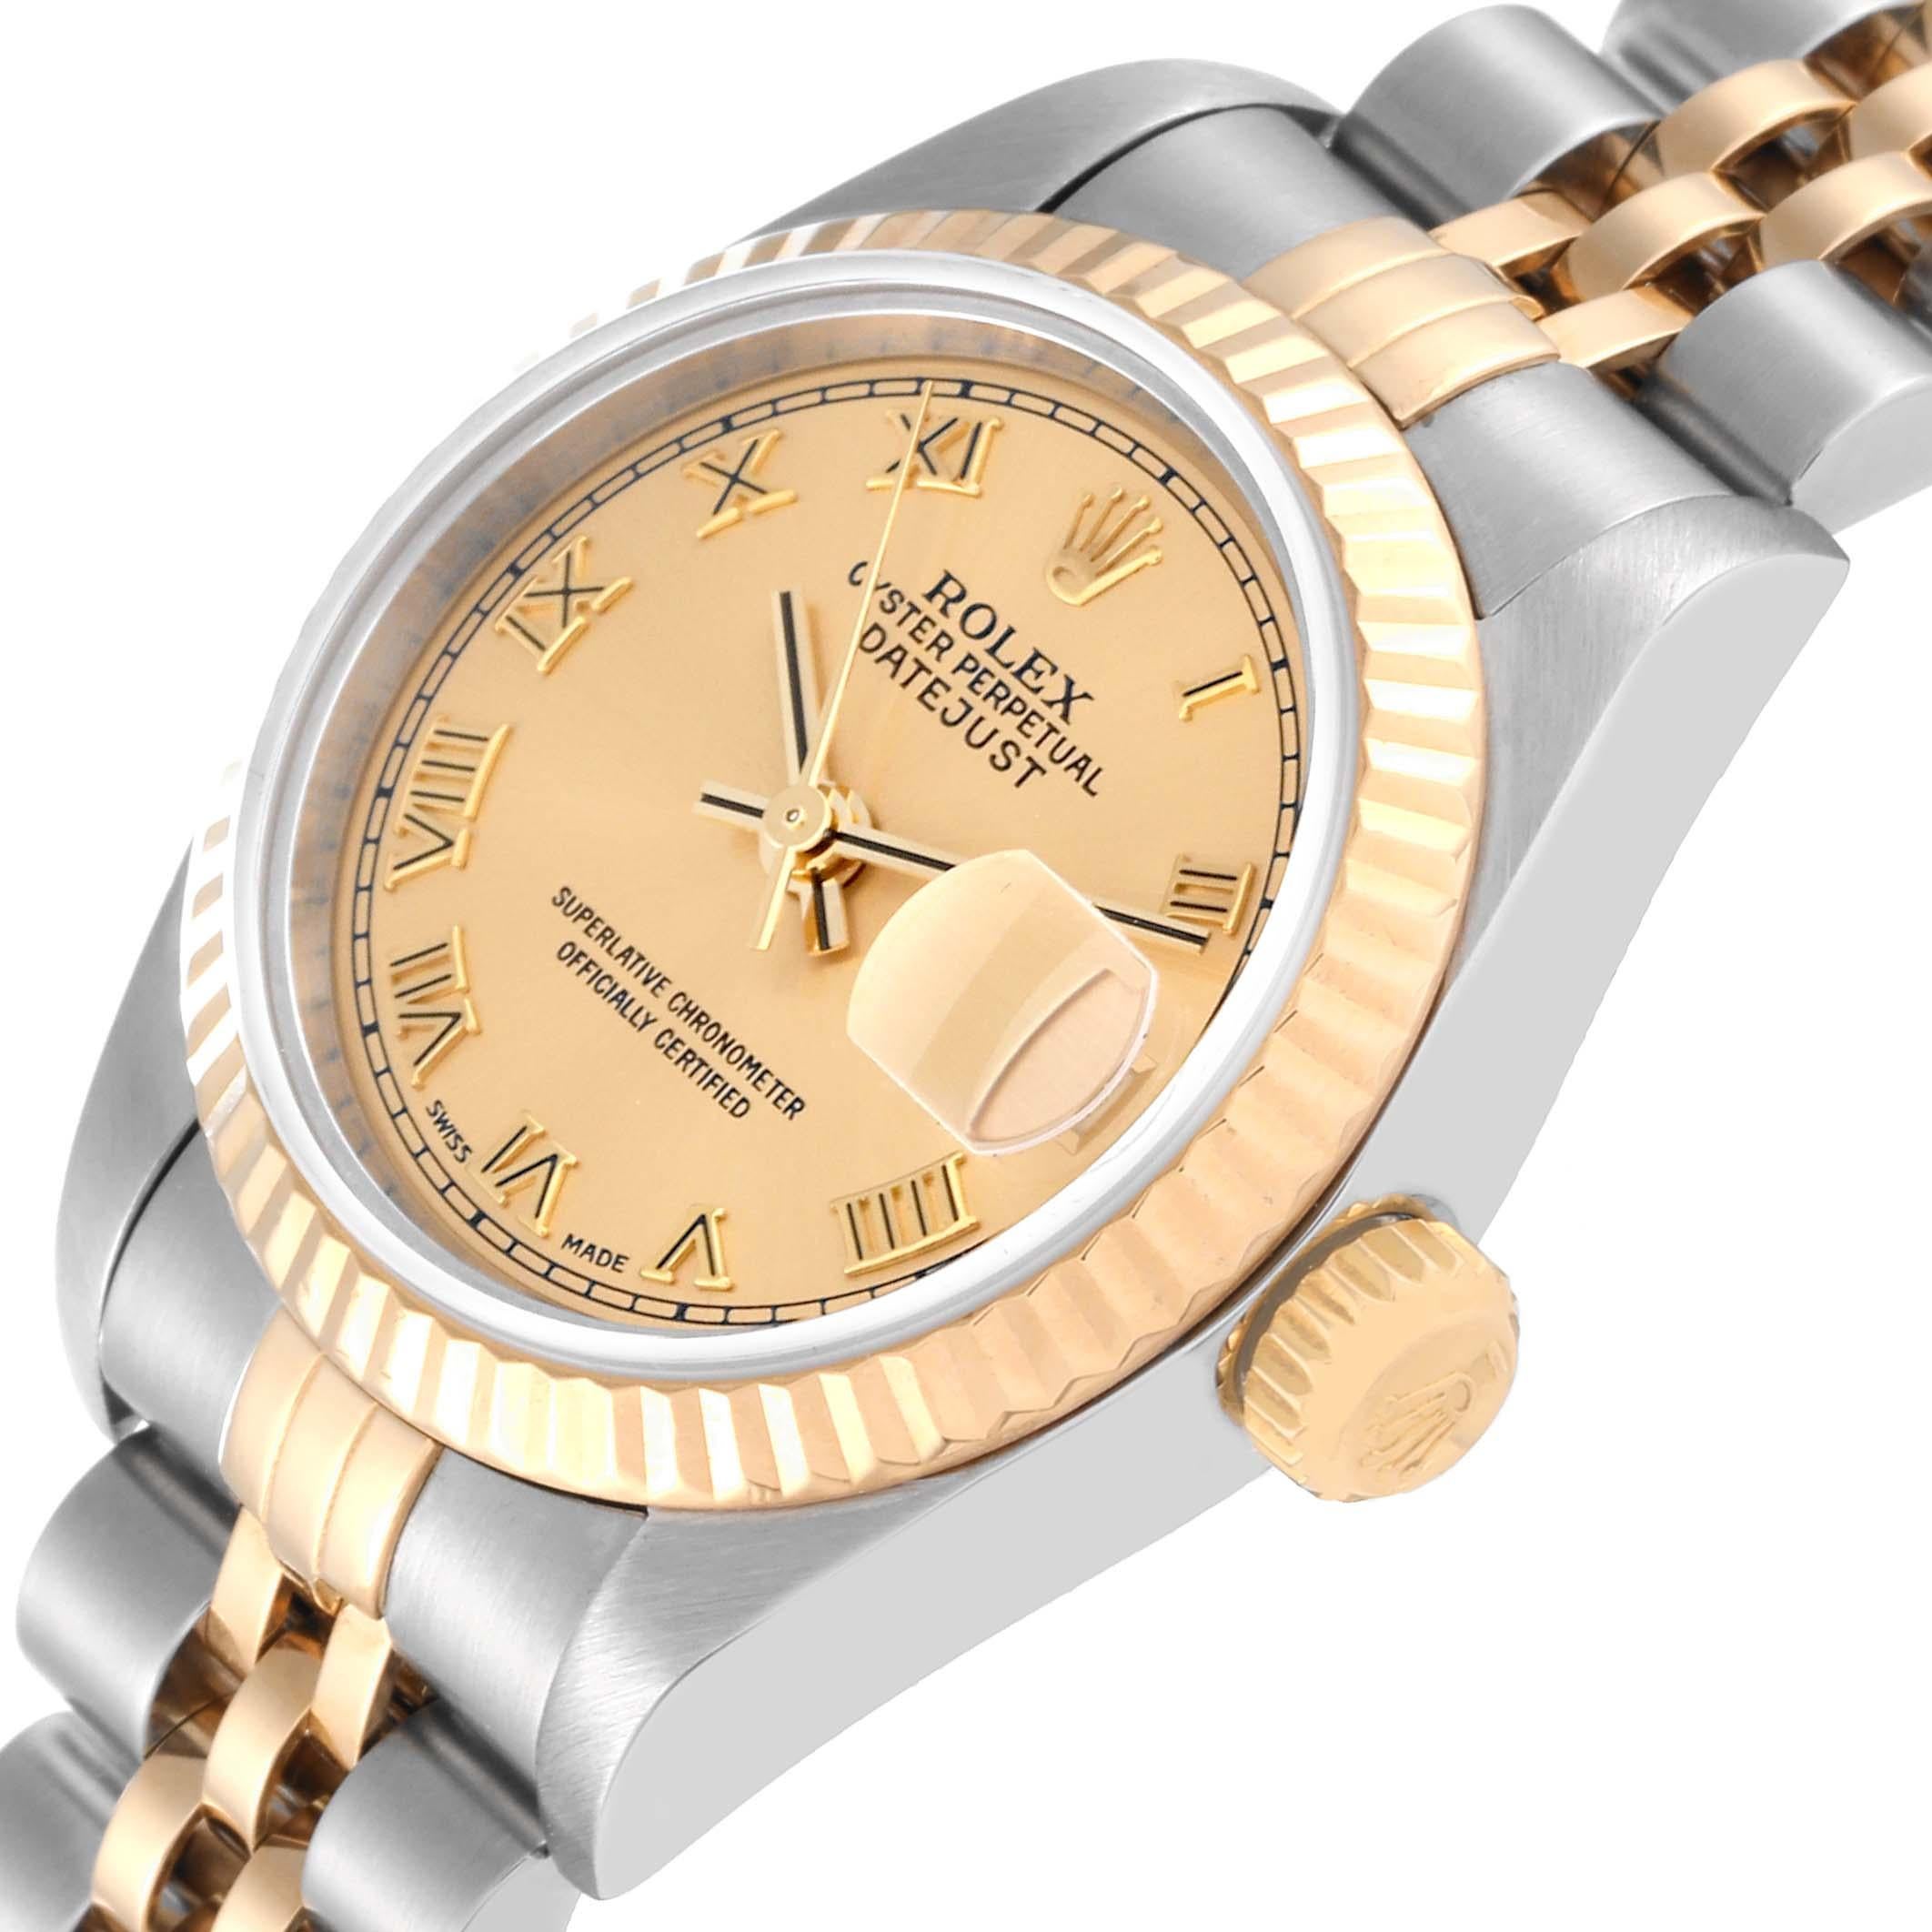 Rolex Datejust Steel Yellow Gold Champagne Dial Ladies Watch 79173 For Sale 1